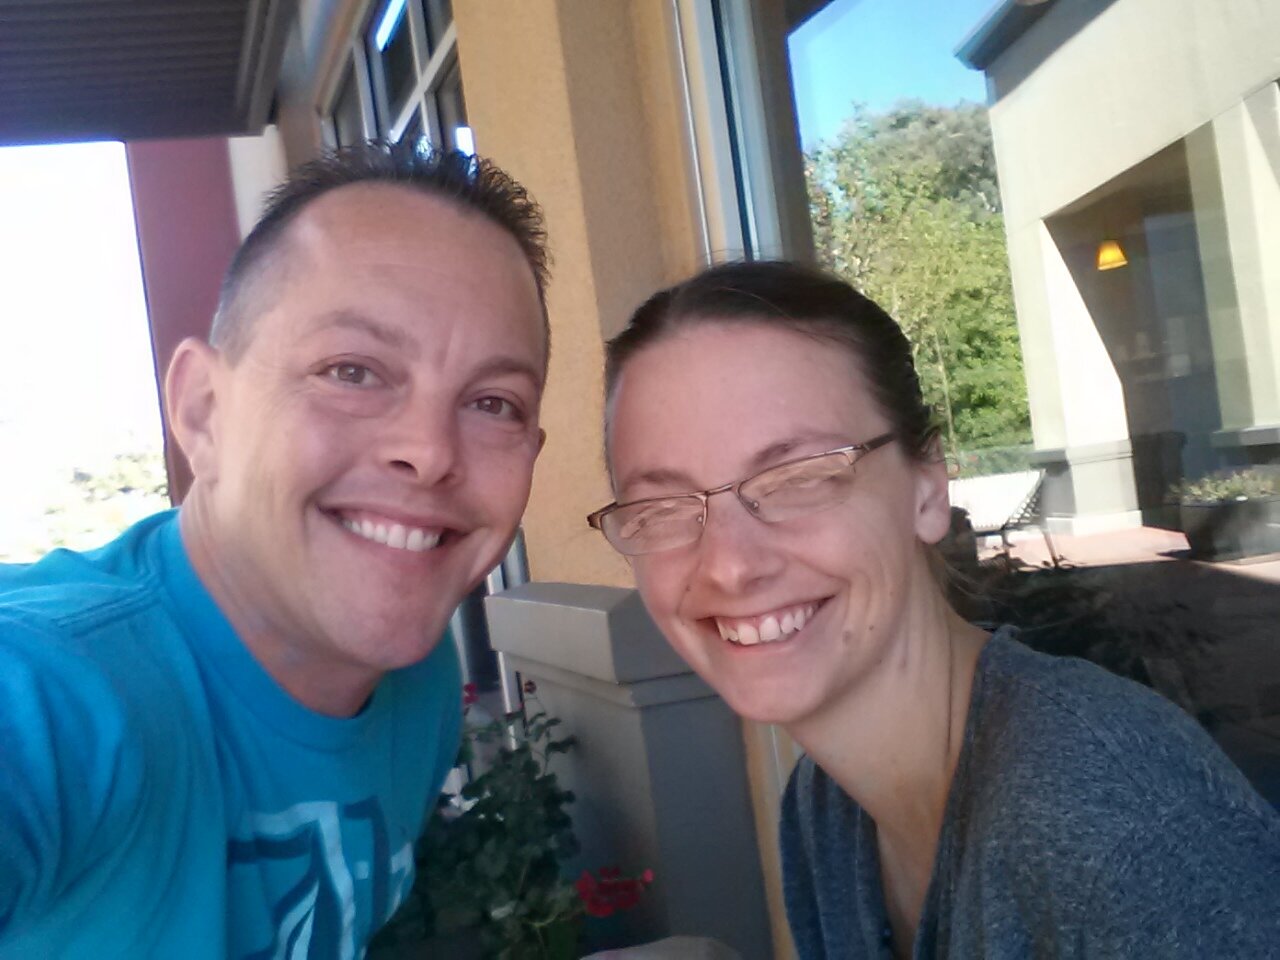 Day 1 ~ Justin &amp; Linda first met at Peet's Coffee in Pinole - October 12, 2014